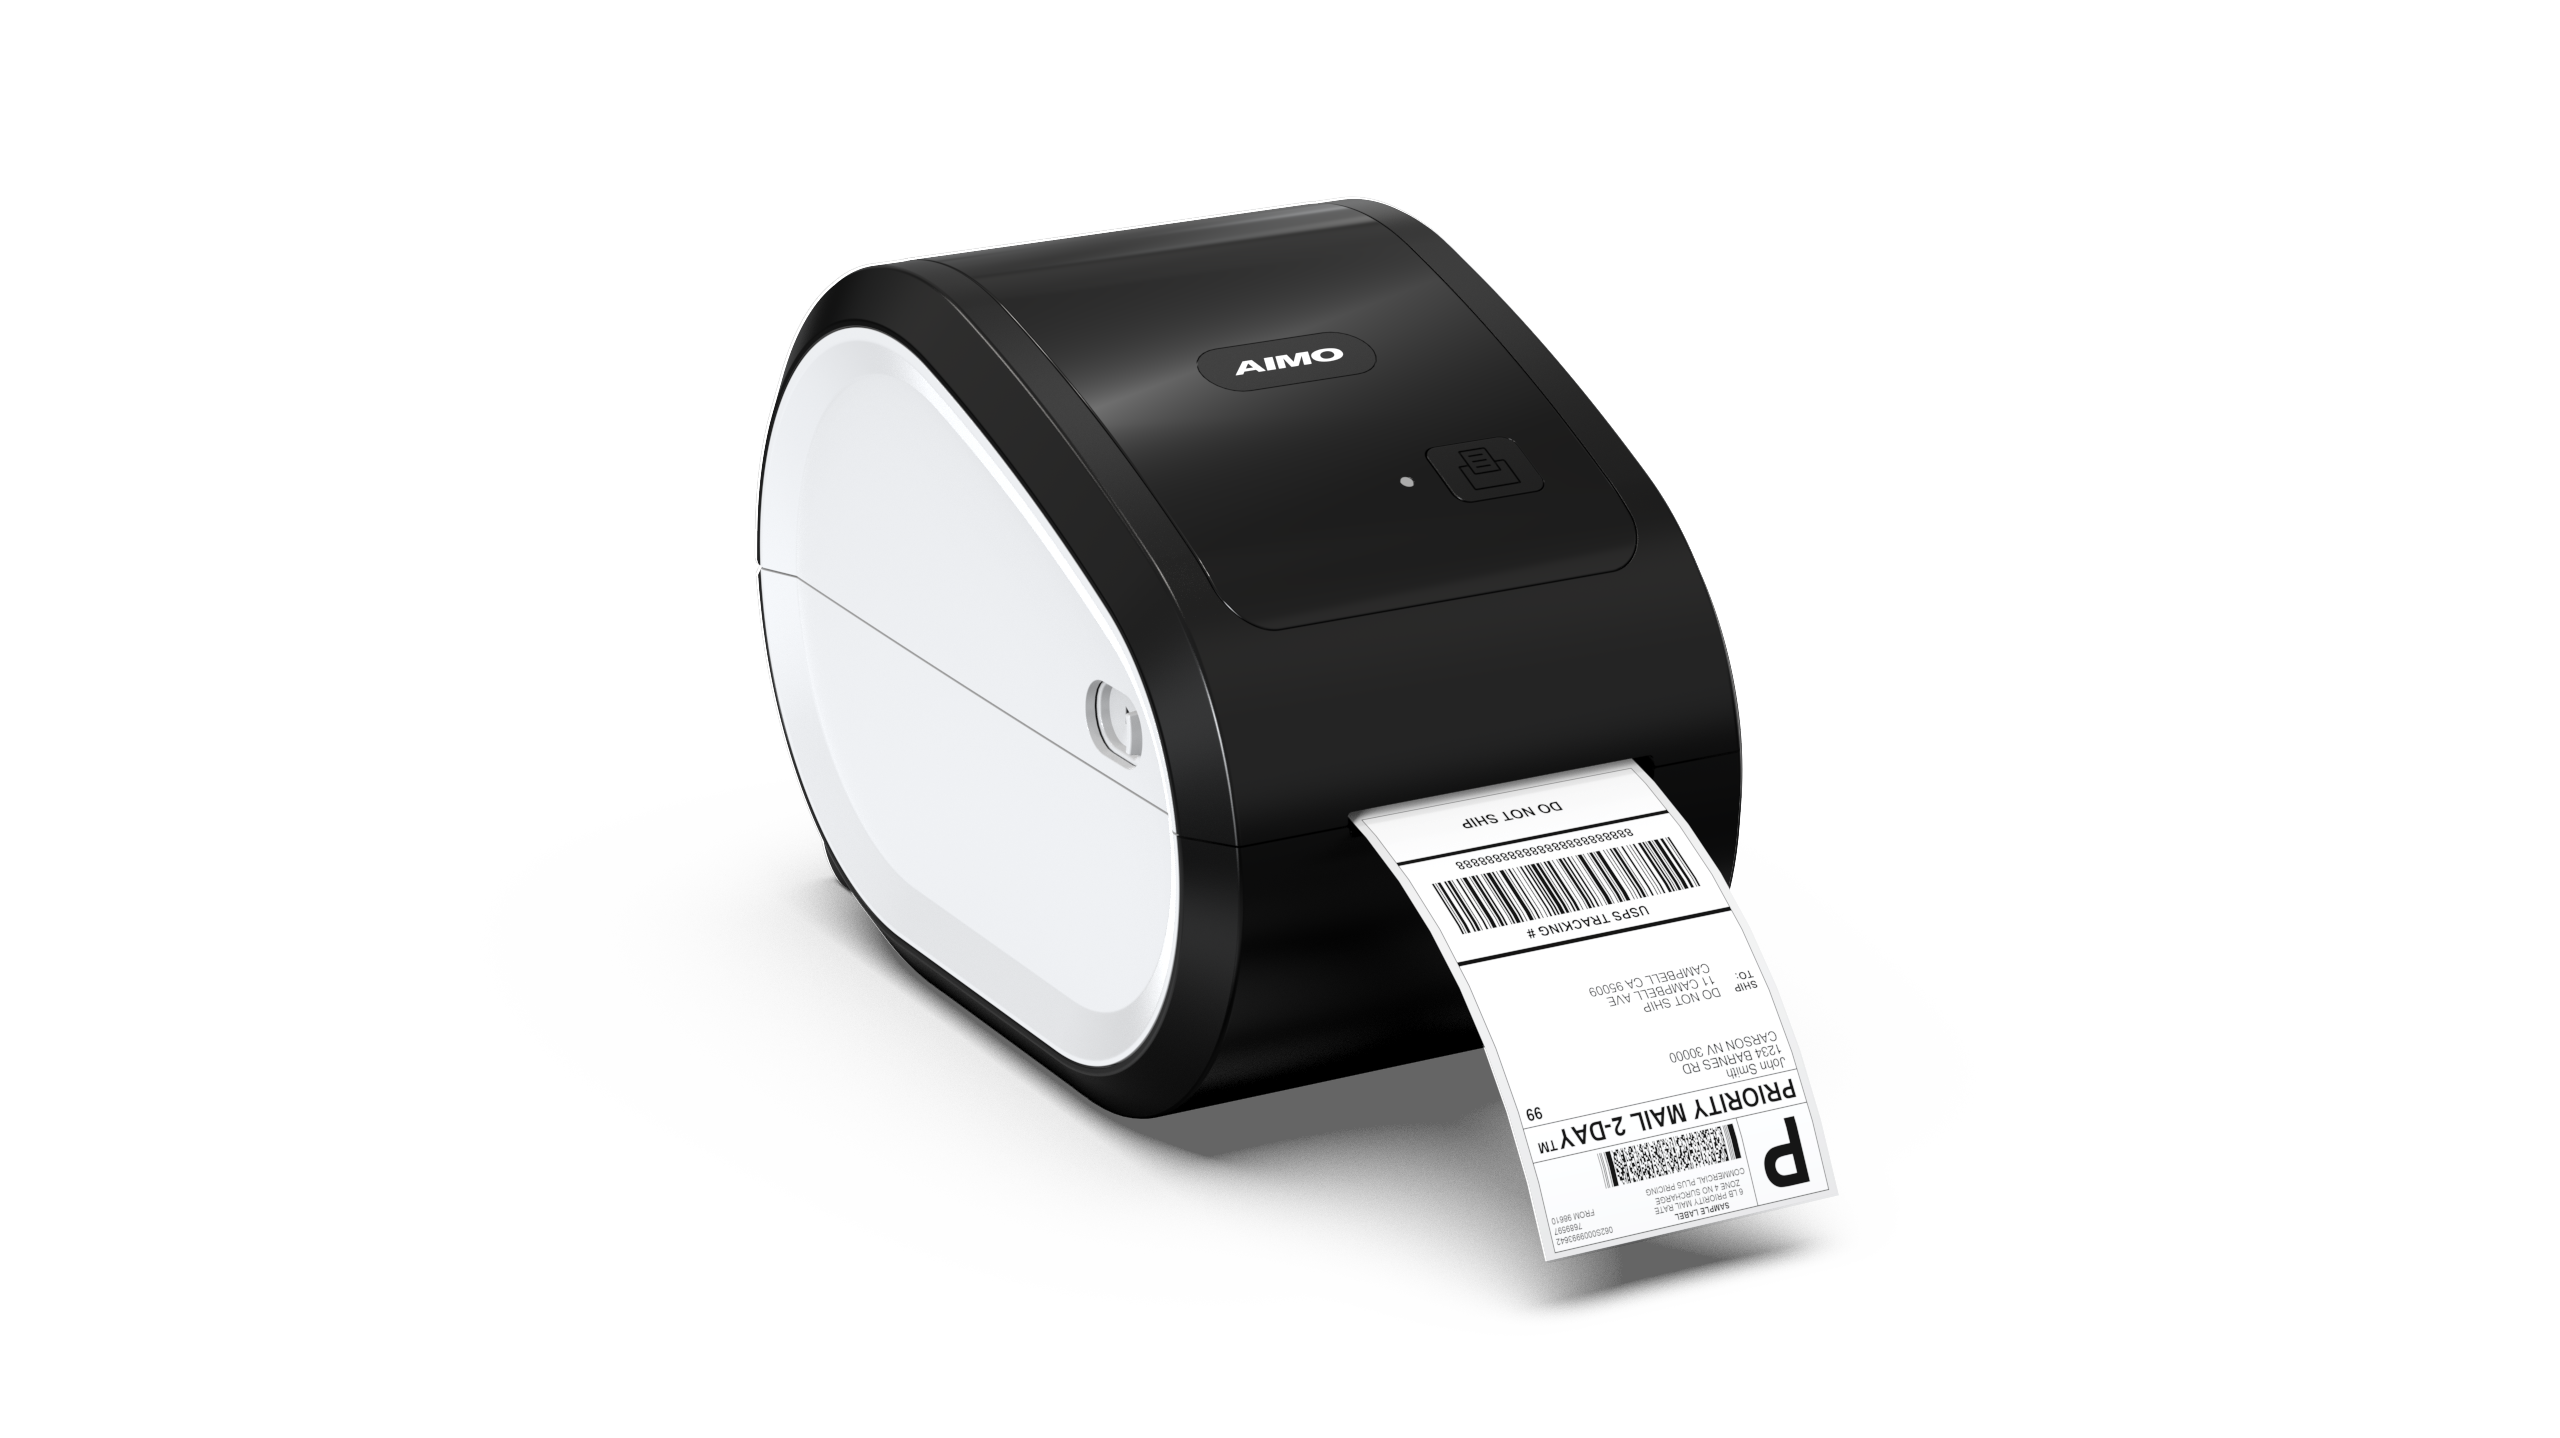 AIMO 650: The Best Label Printer for Healthcare Administration